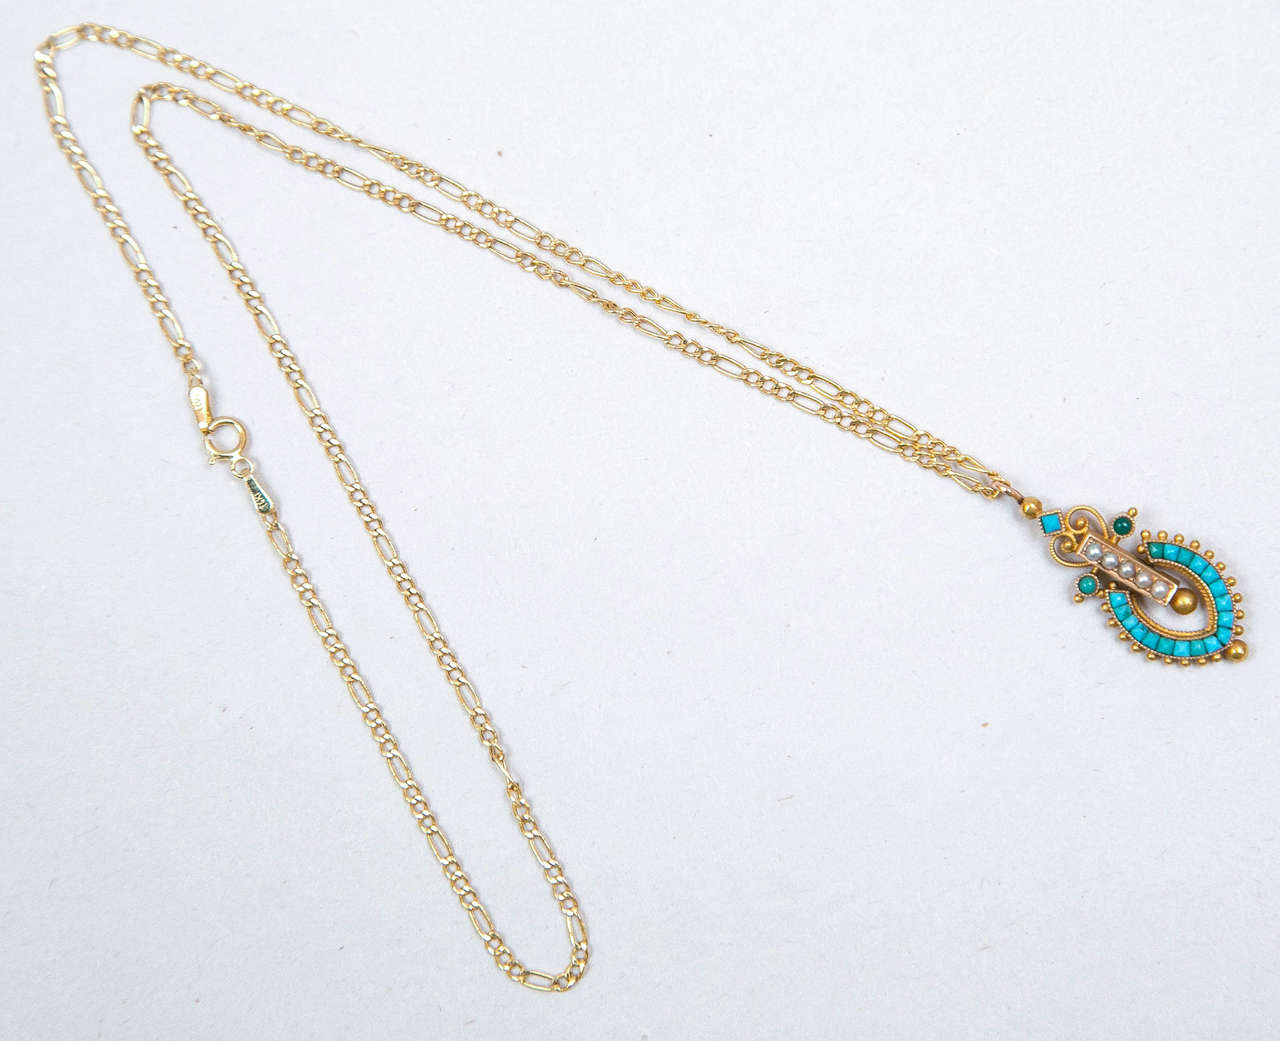 Turquoise and seed pearls pendant Victorian 18K gold Victorian pendant- 14K chain, unique.